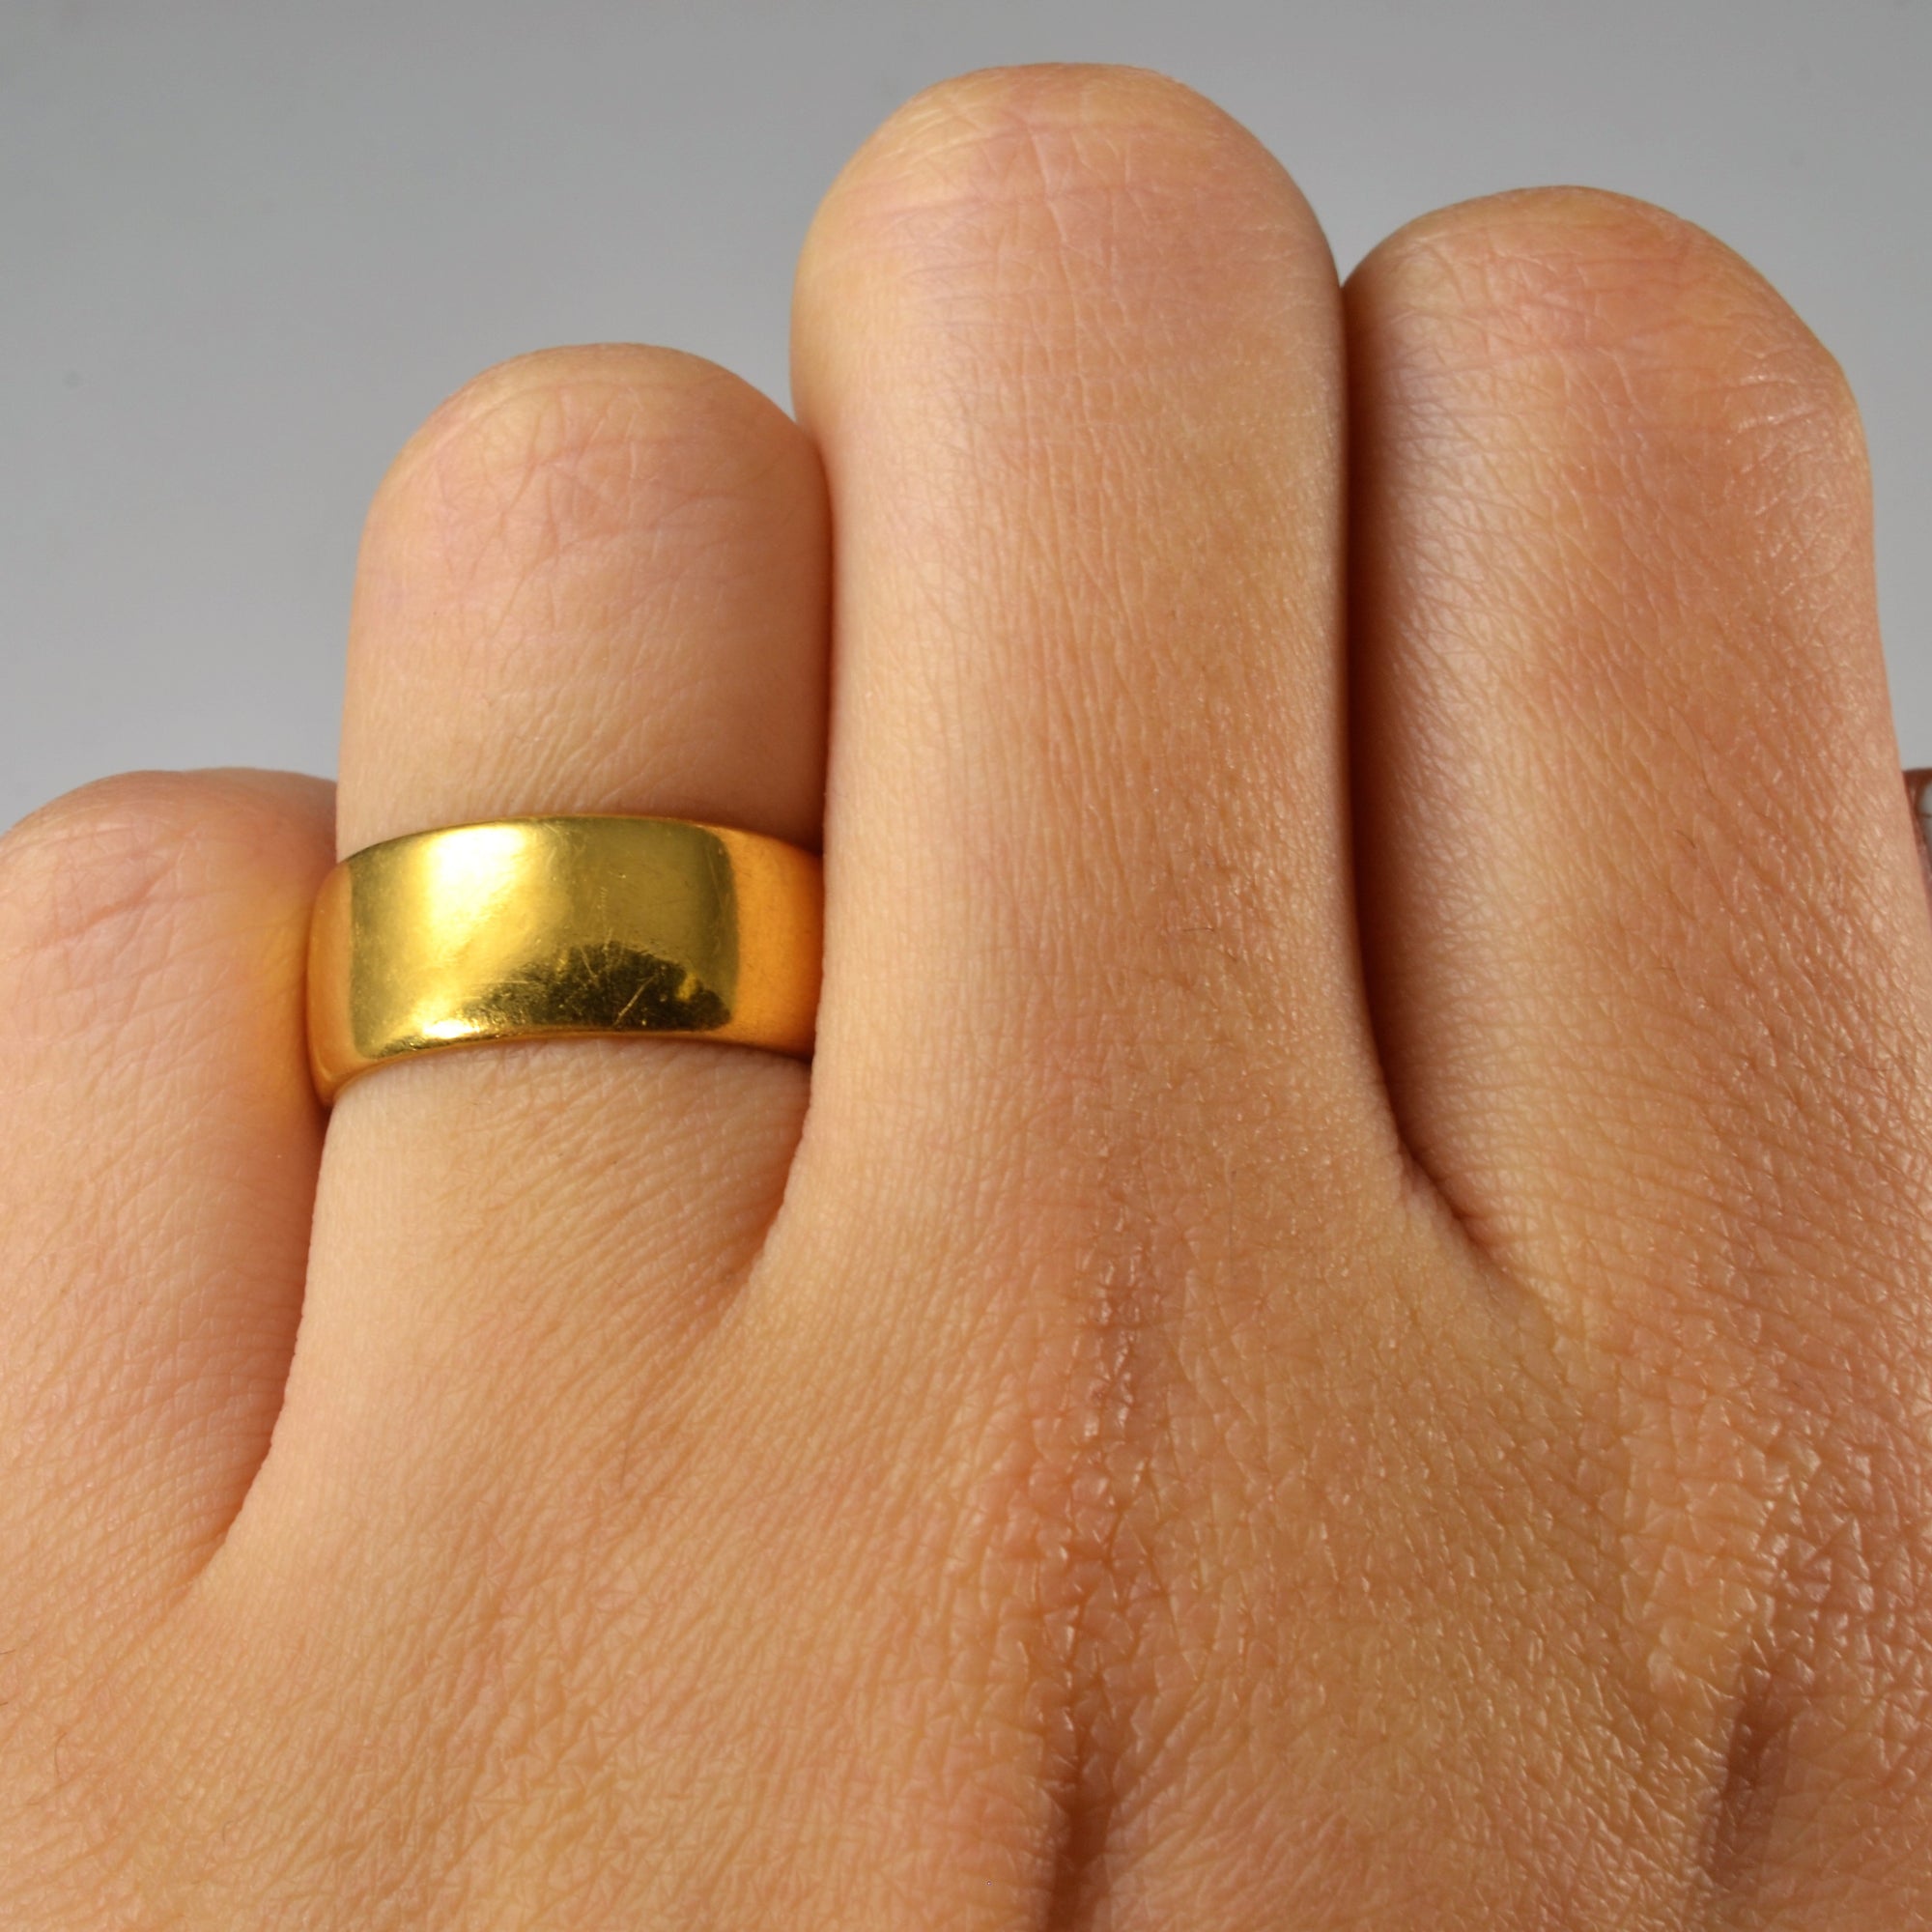 1890s Gold Band | SZ 5.25 |